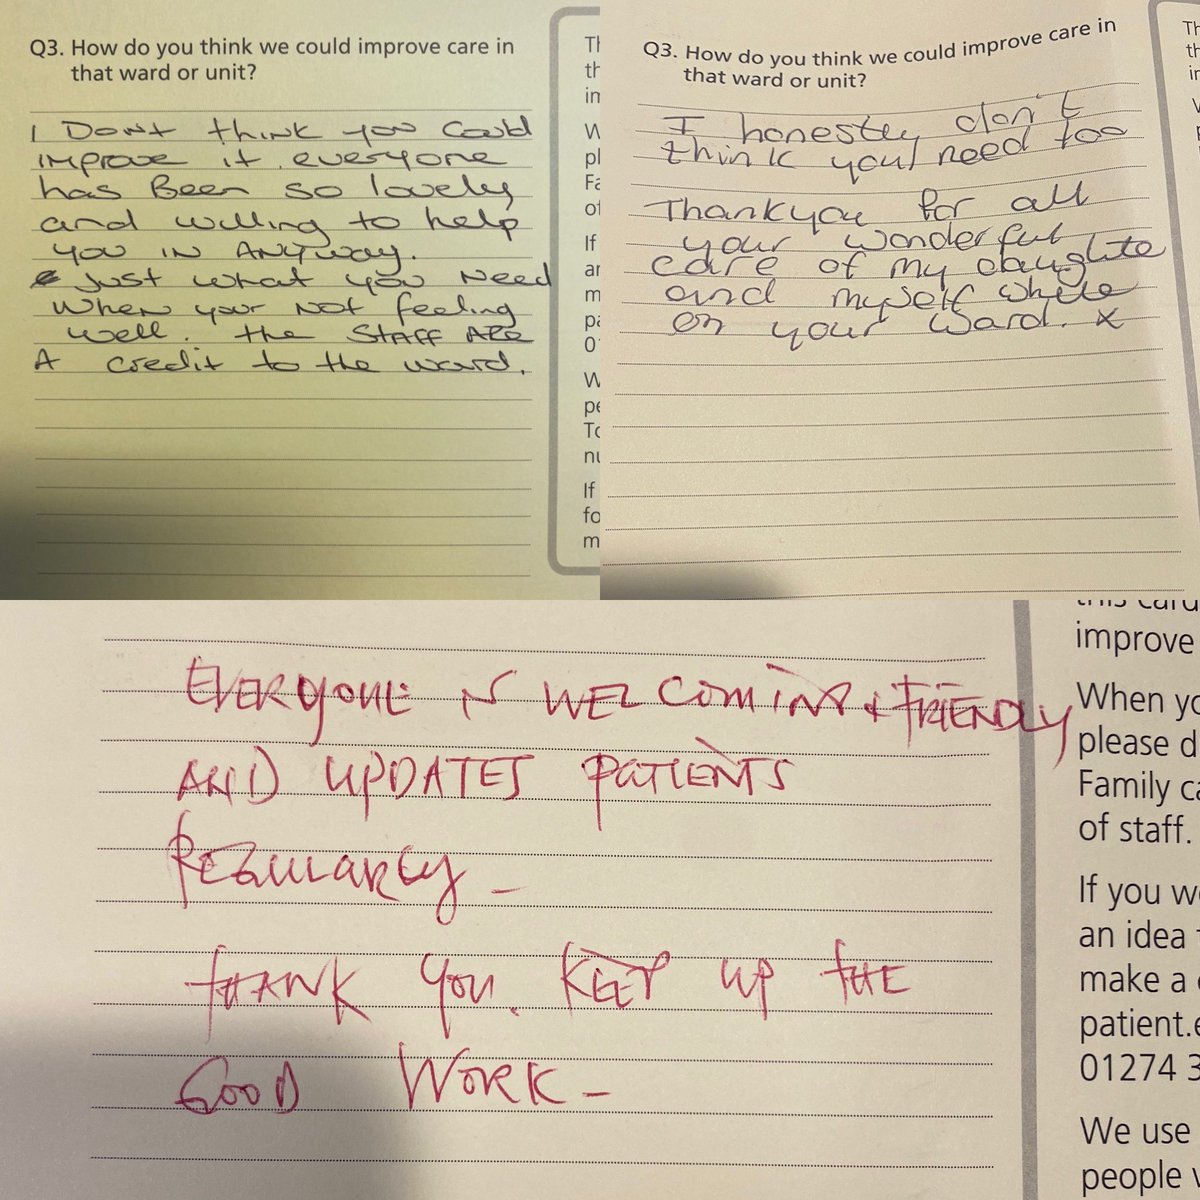 Lovely feedback received from our patients this week #patientexperience #patientsfirst #careandcompassion #feedback @JulieBrook10 @karendawber @Mel_Pickup @simonkirk_